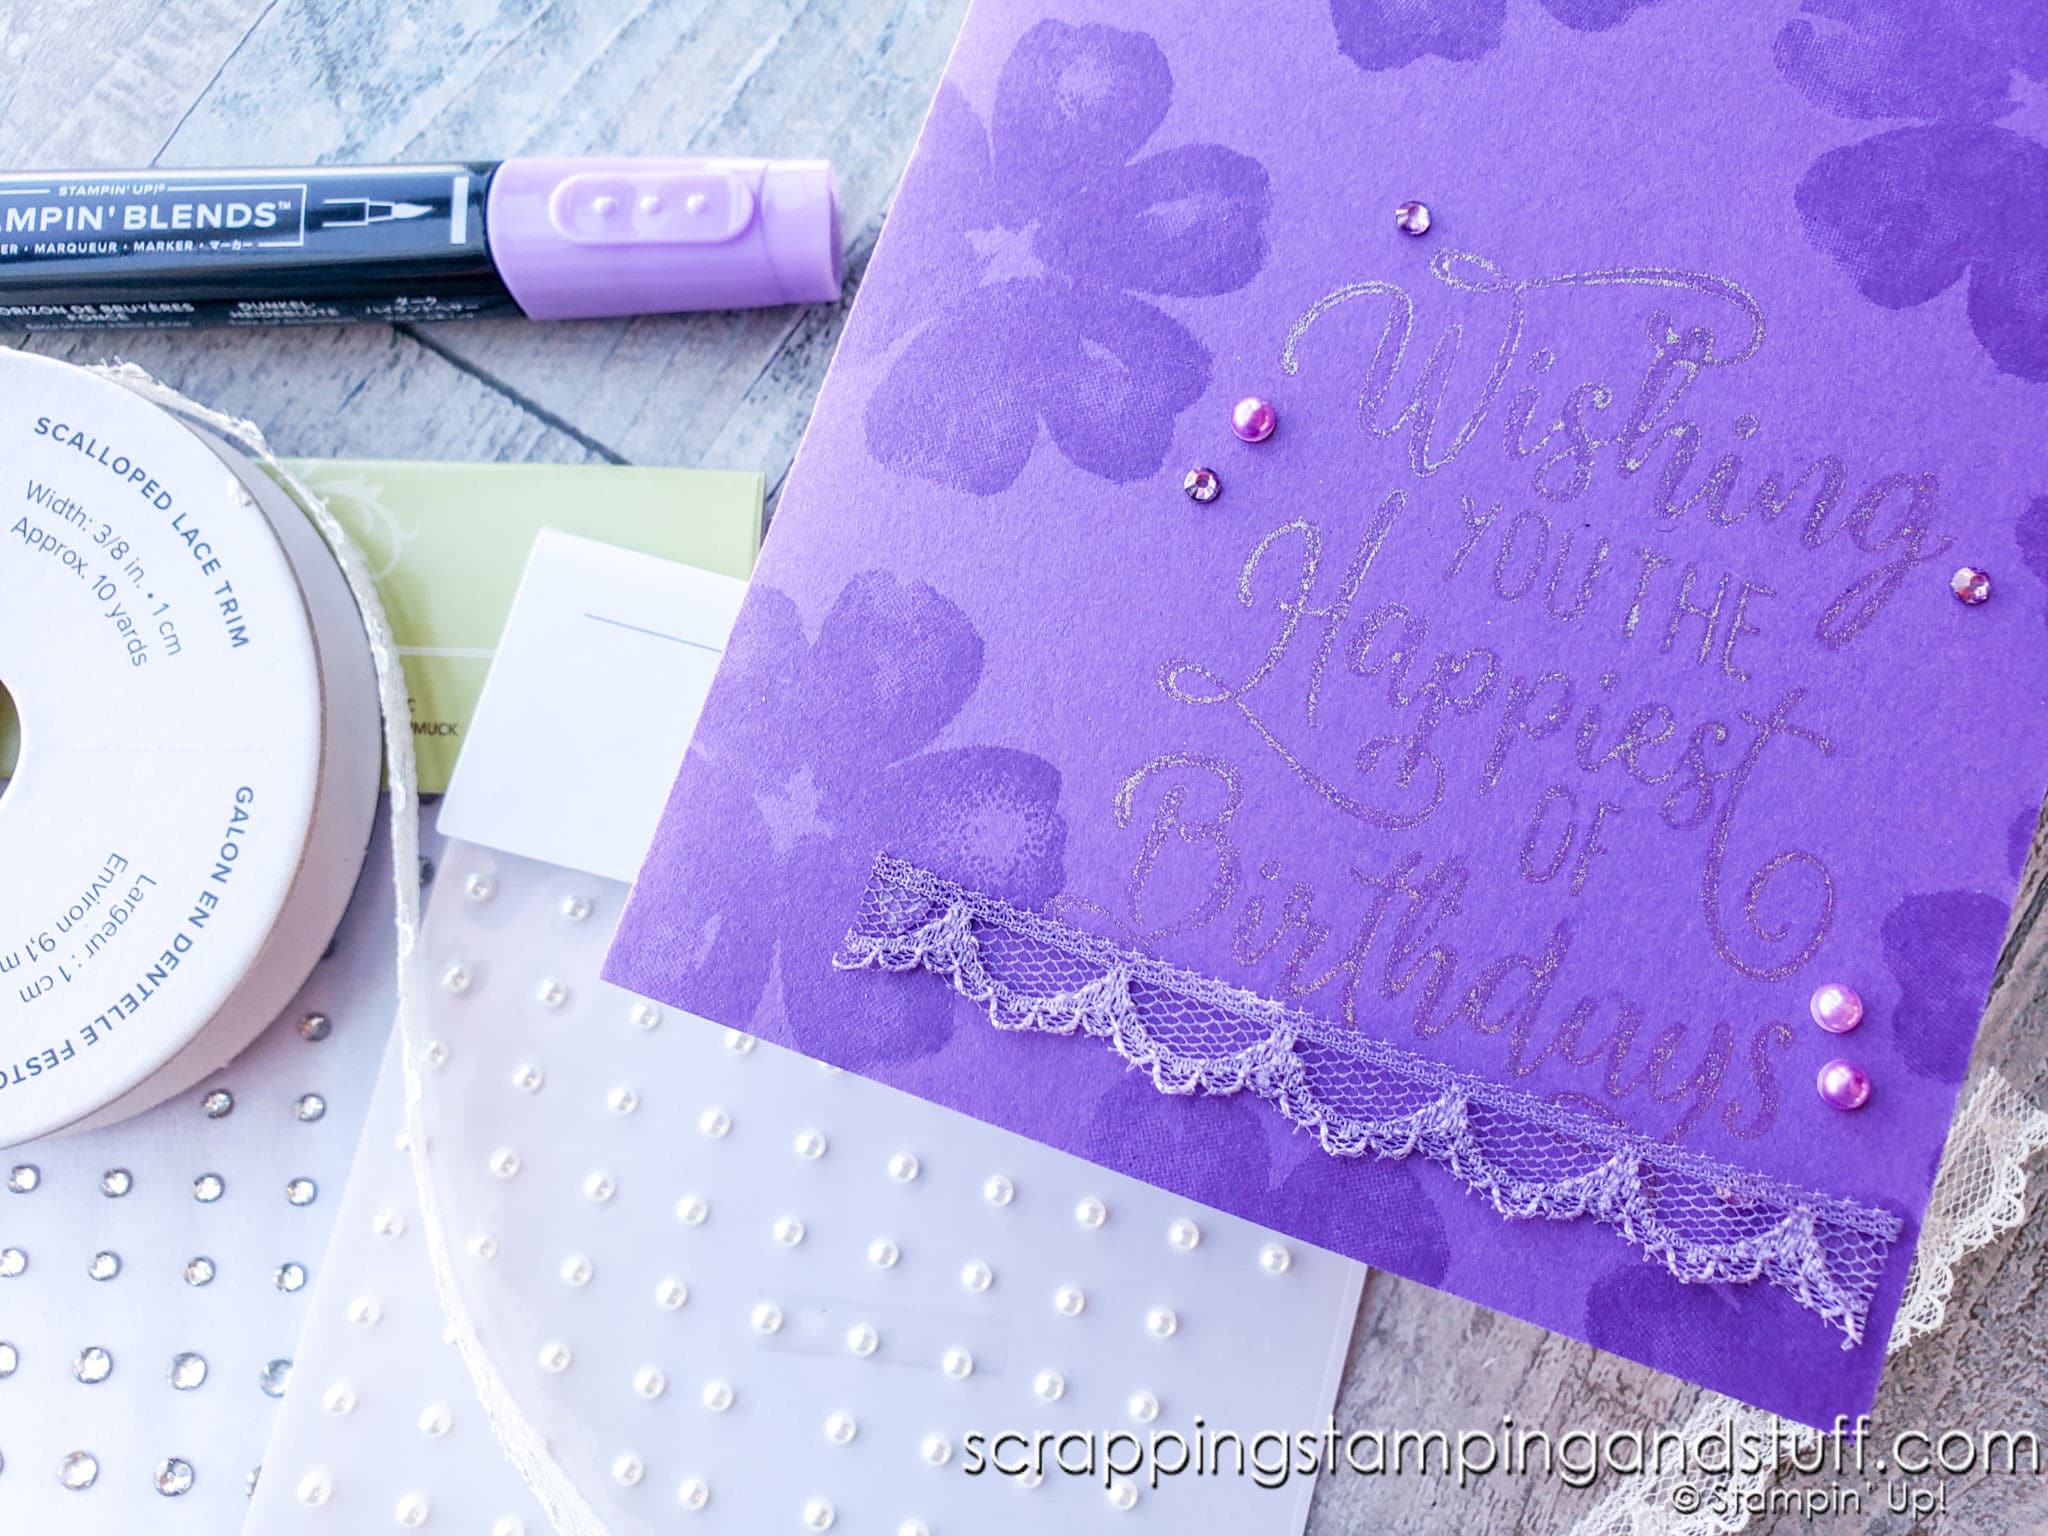 Customize Your Embellishments With The Perfect Color For Your Project!